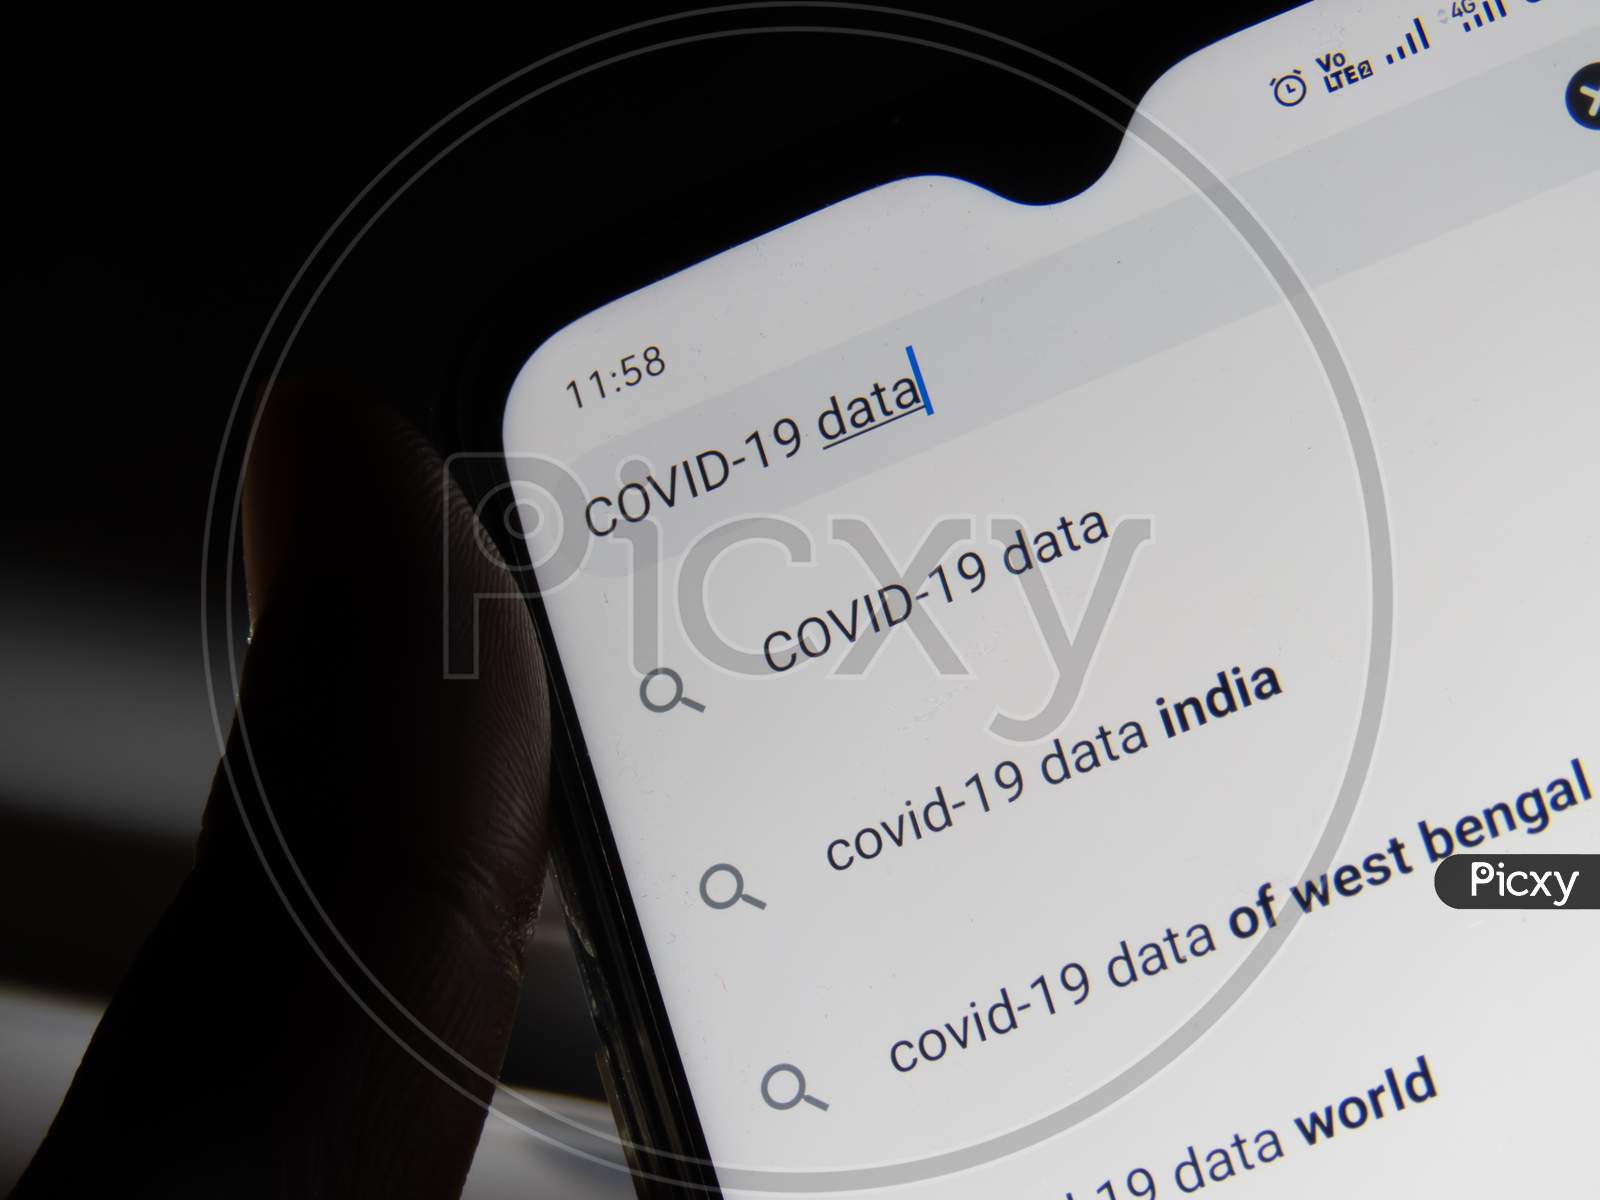 Searching For Covid-19 Data In Internet.